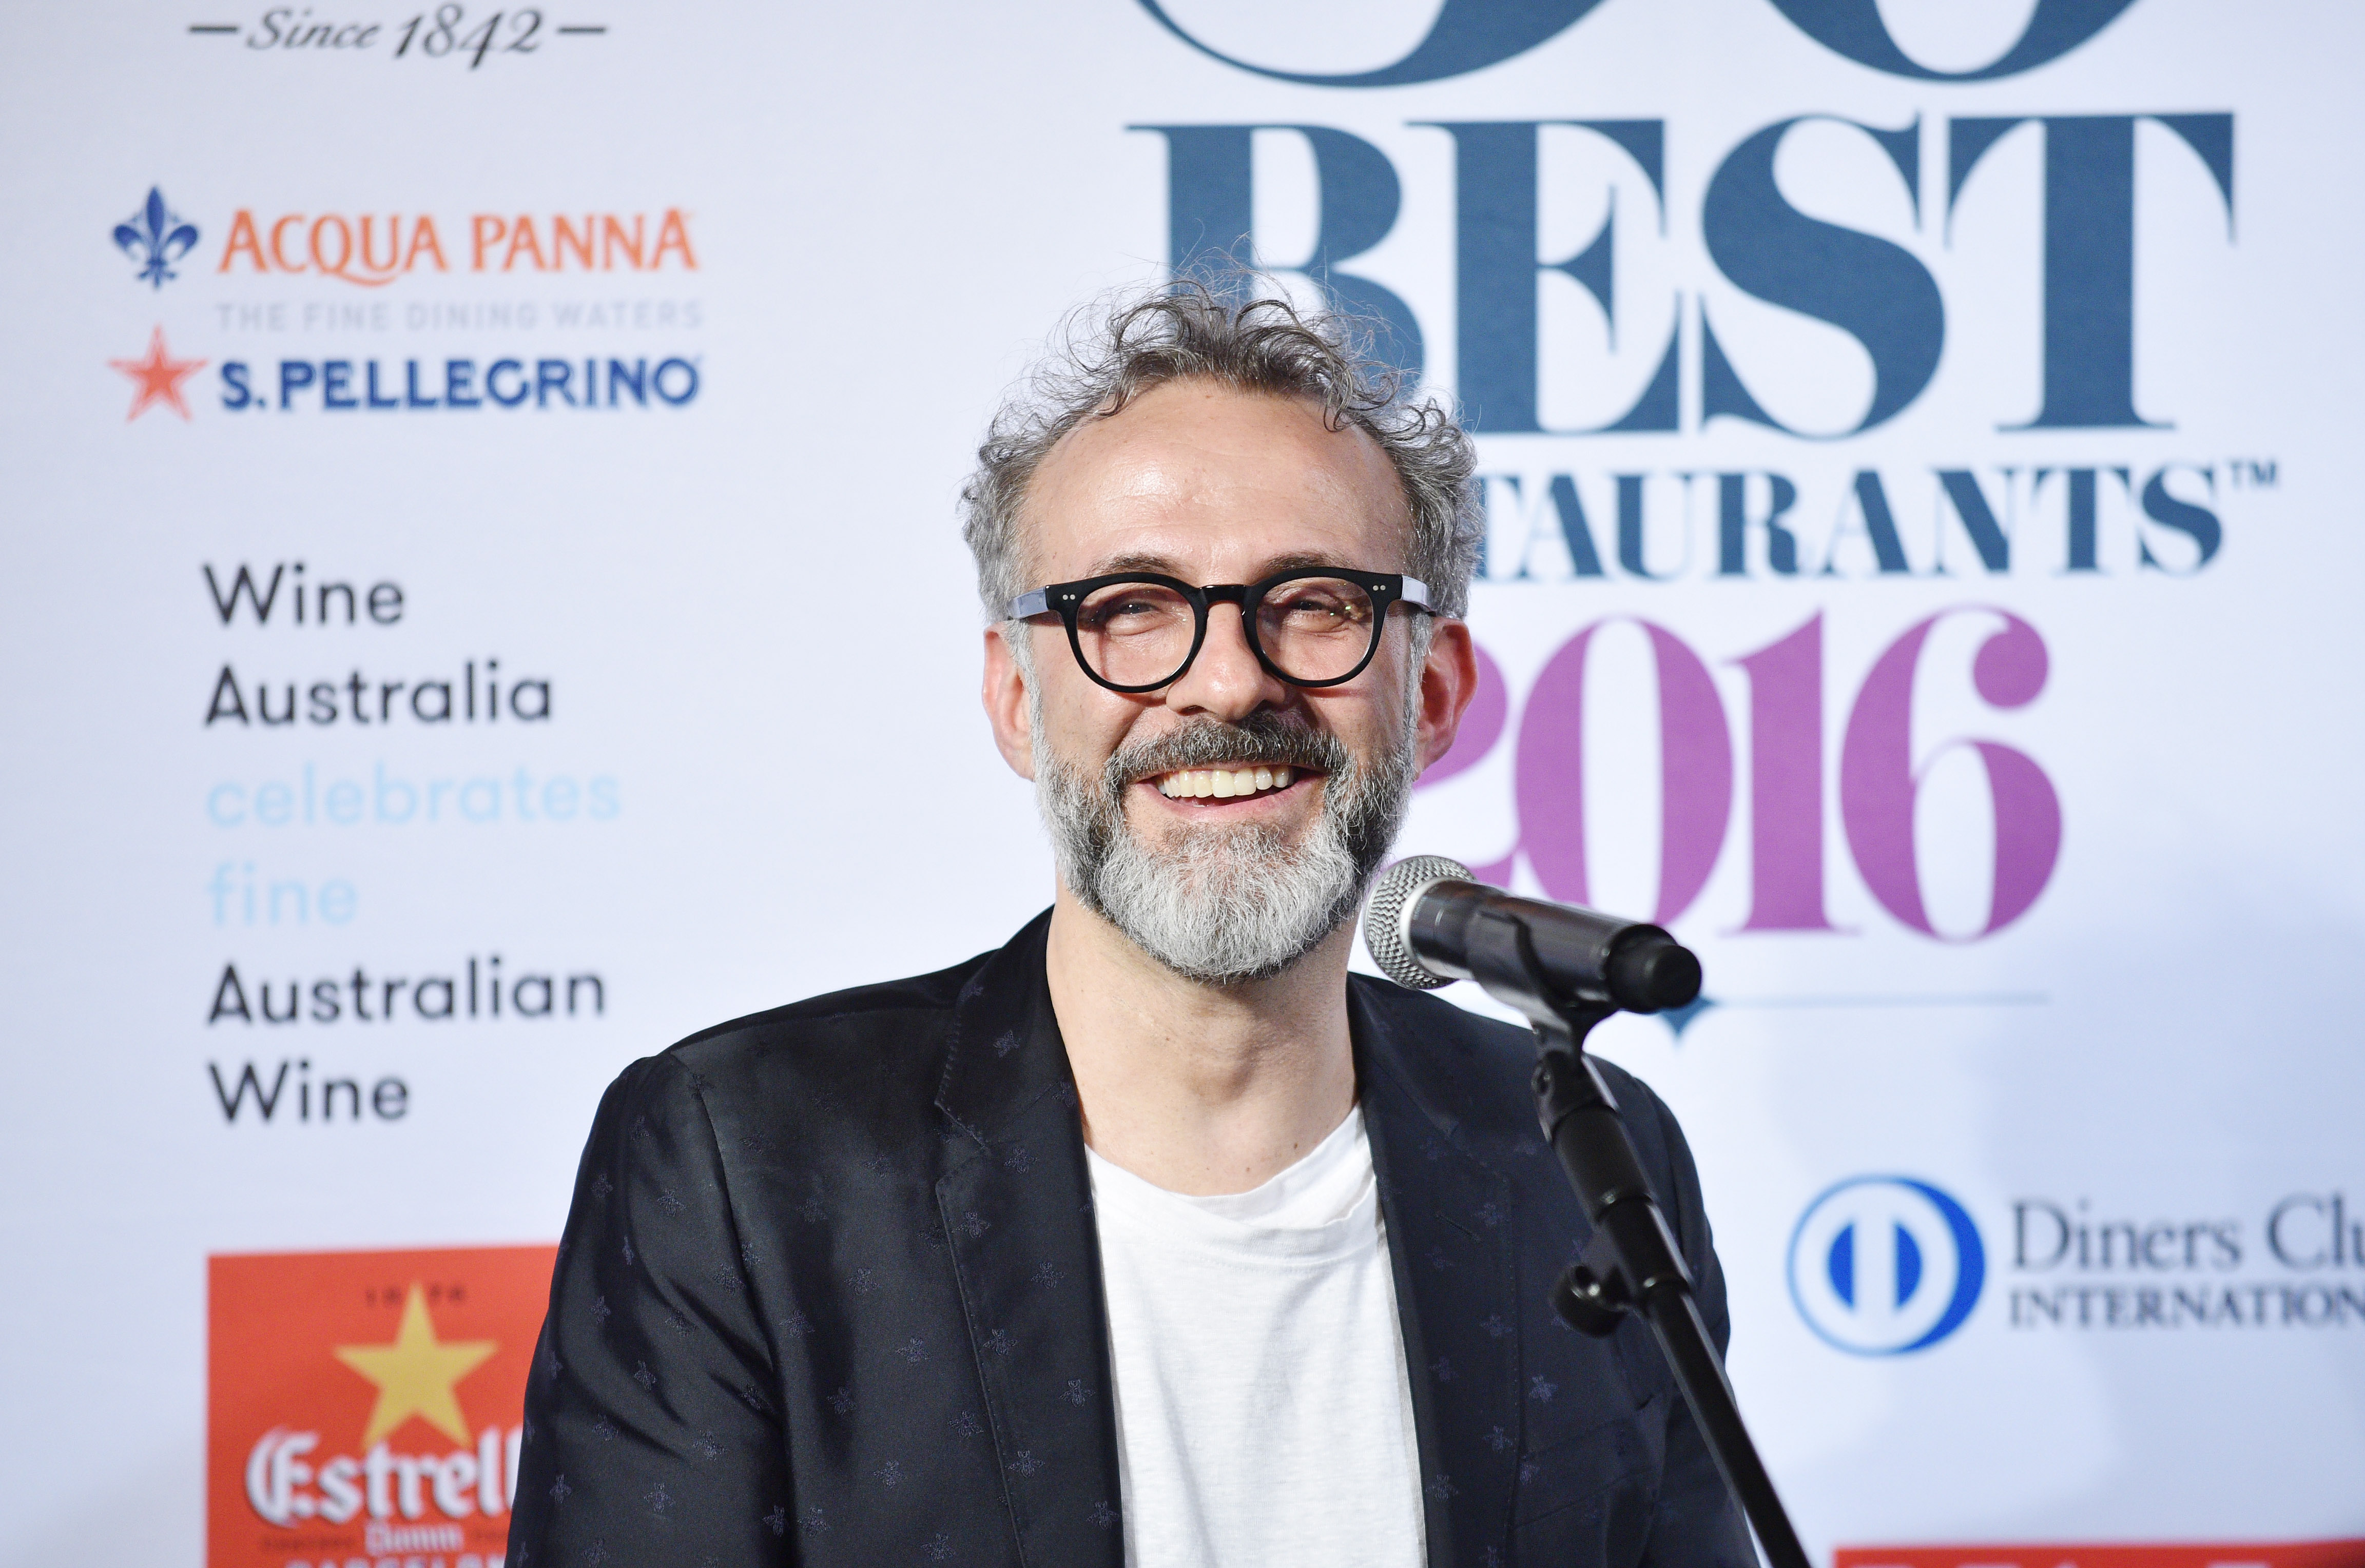 LAVAZZA Coffee Proudly Supports The World's 50 Best Restaurant Awards